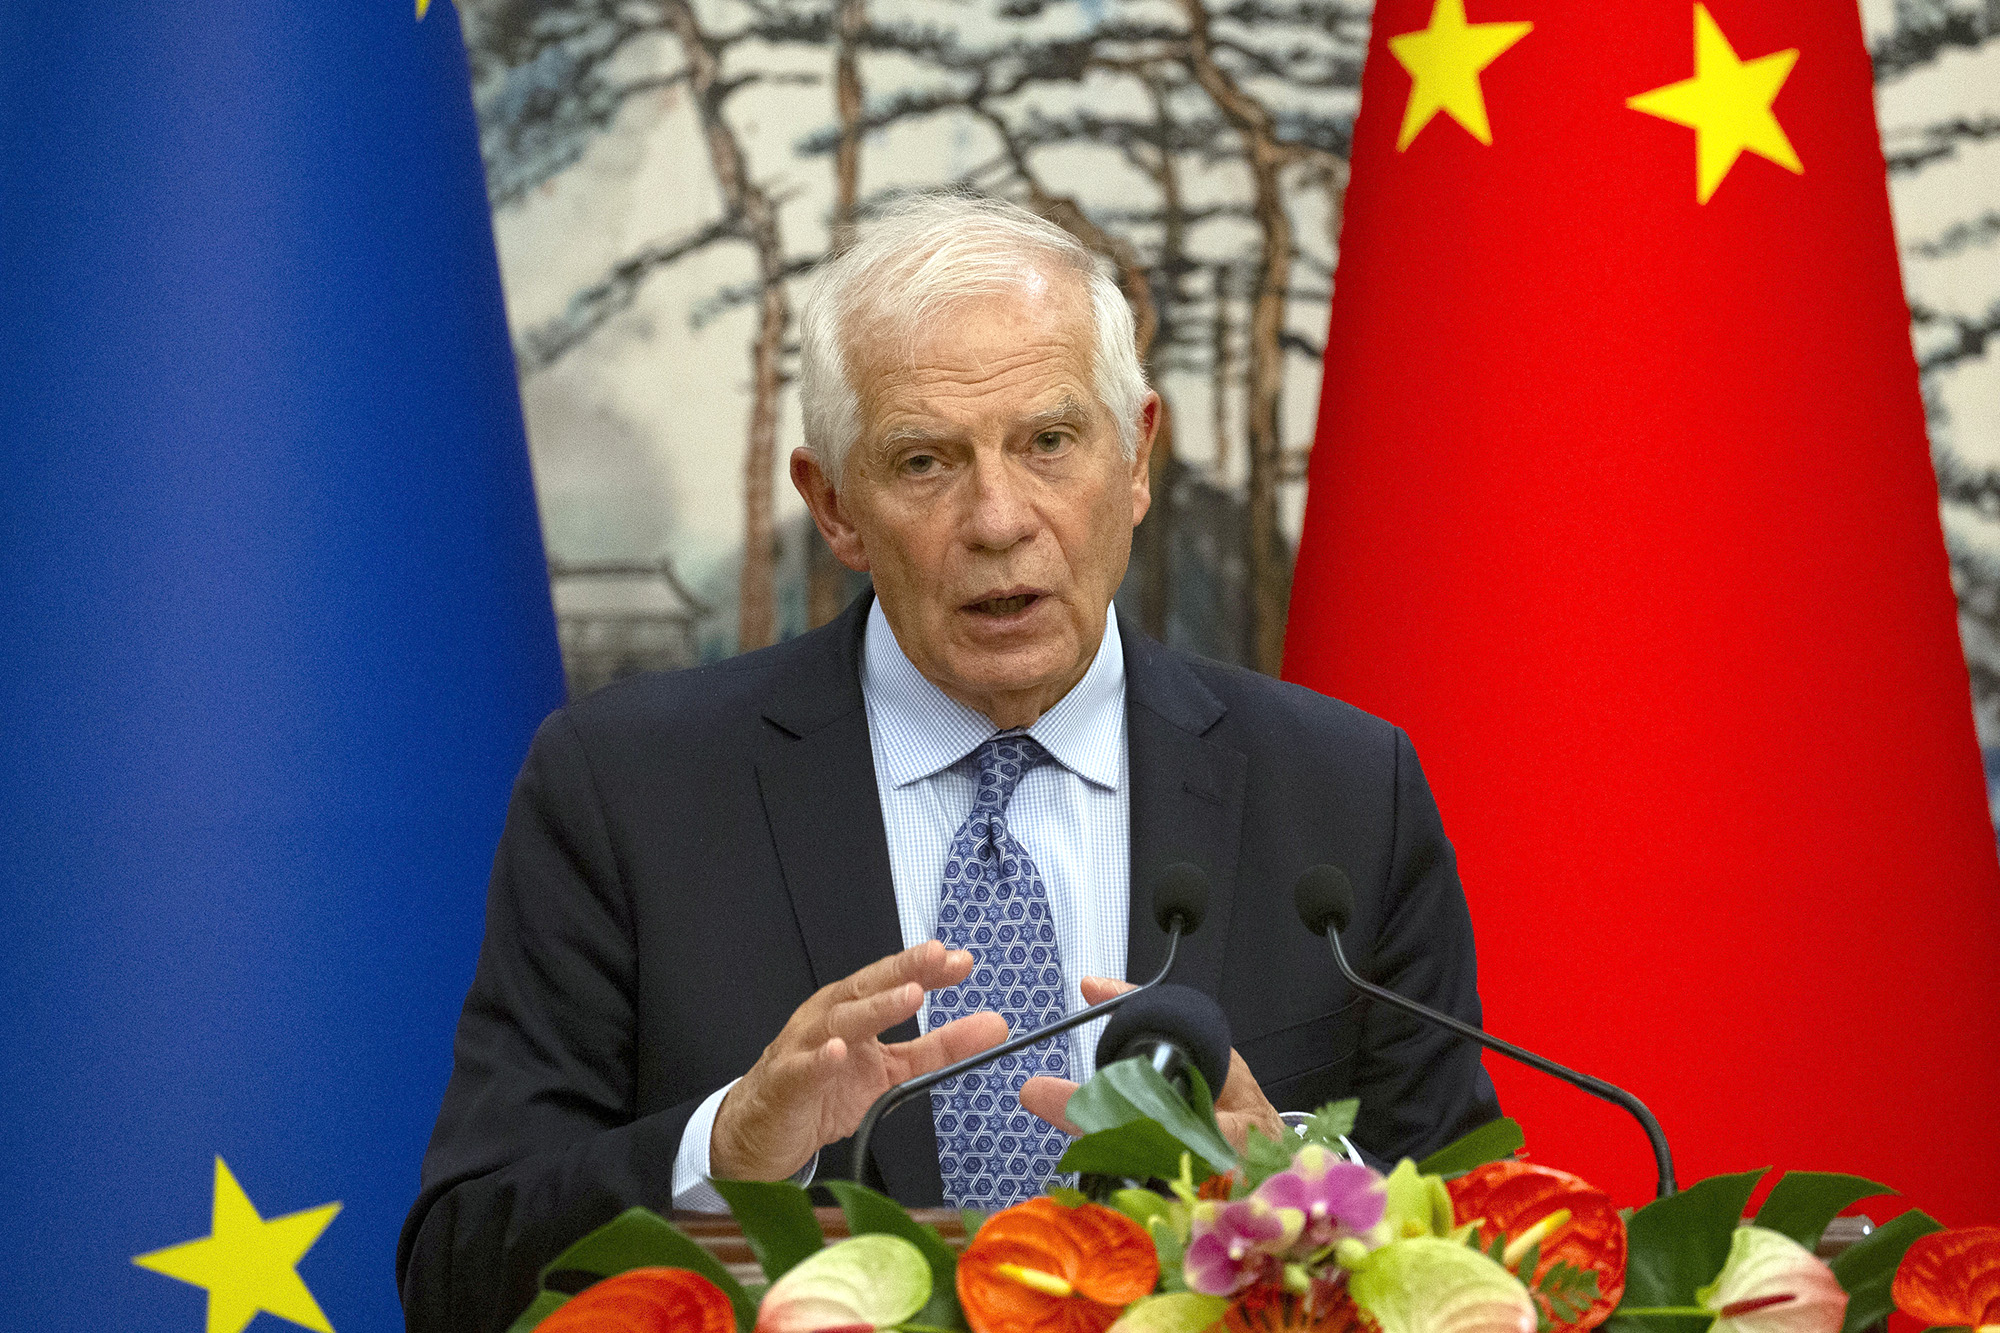 EU foreign policy chief Josep Borrell speaks during a press conference in Beijing, China, on October 13.